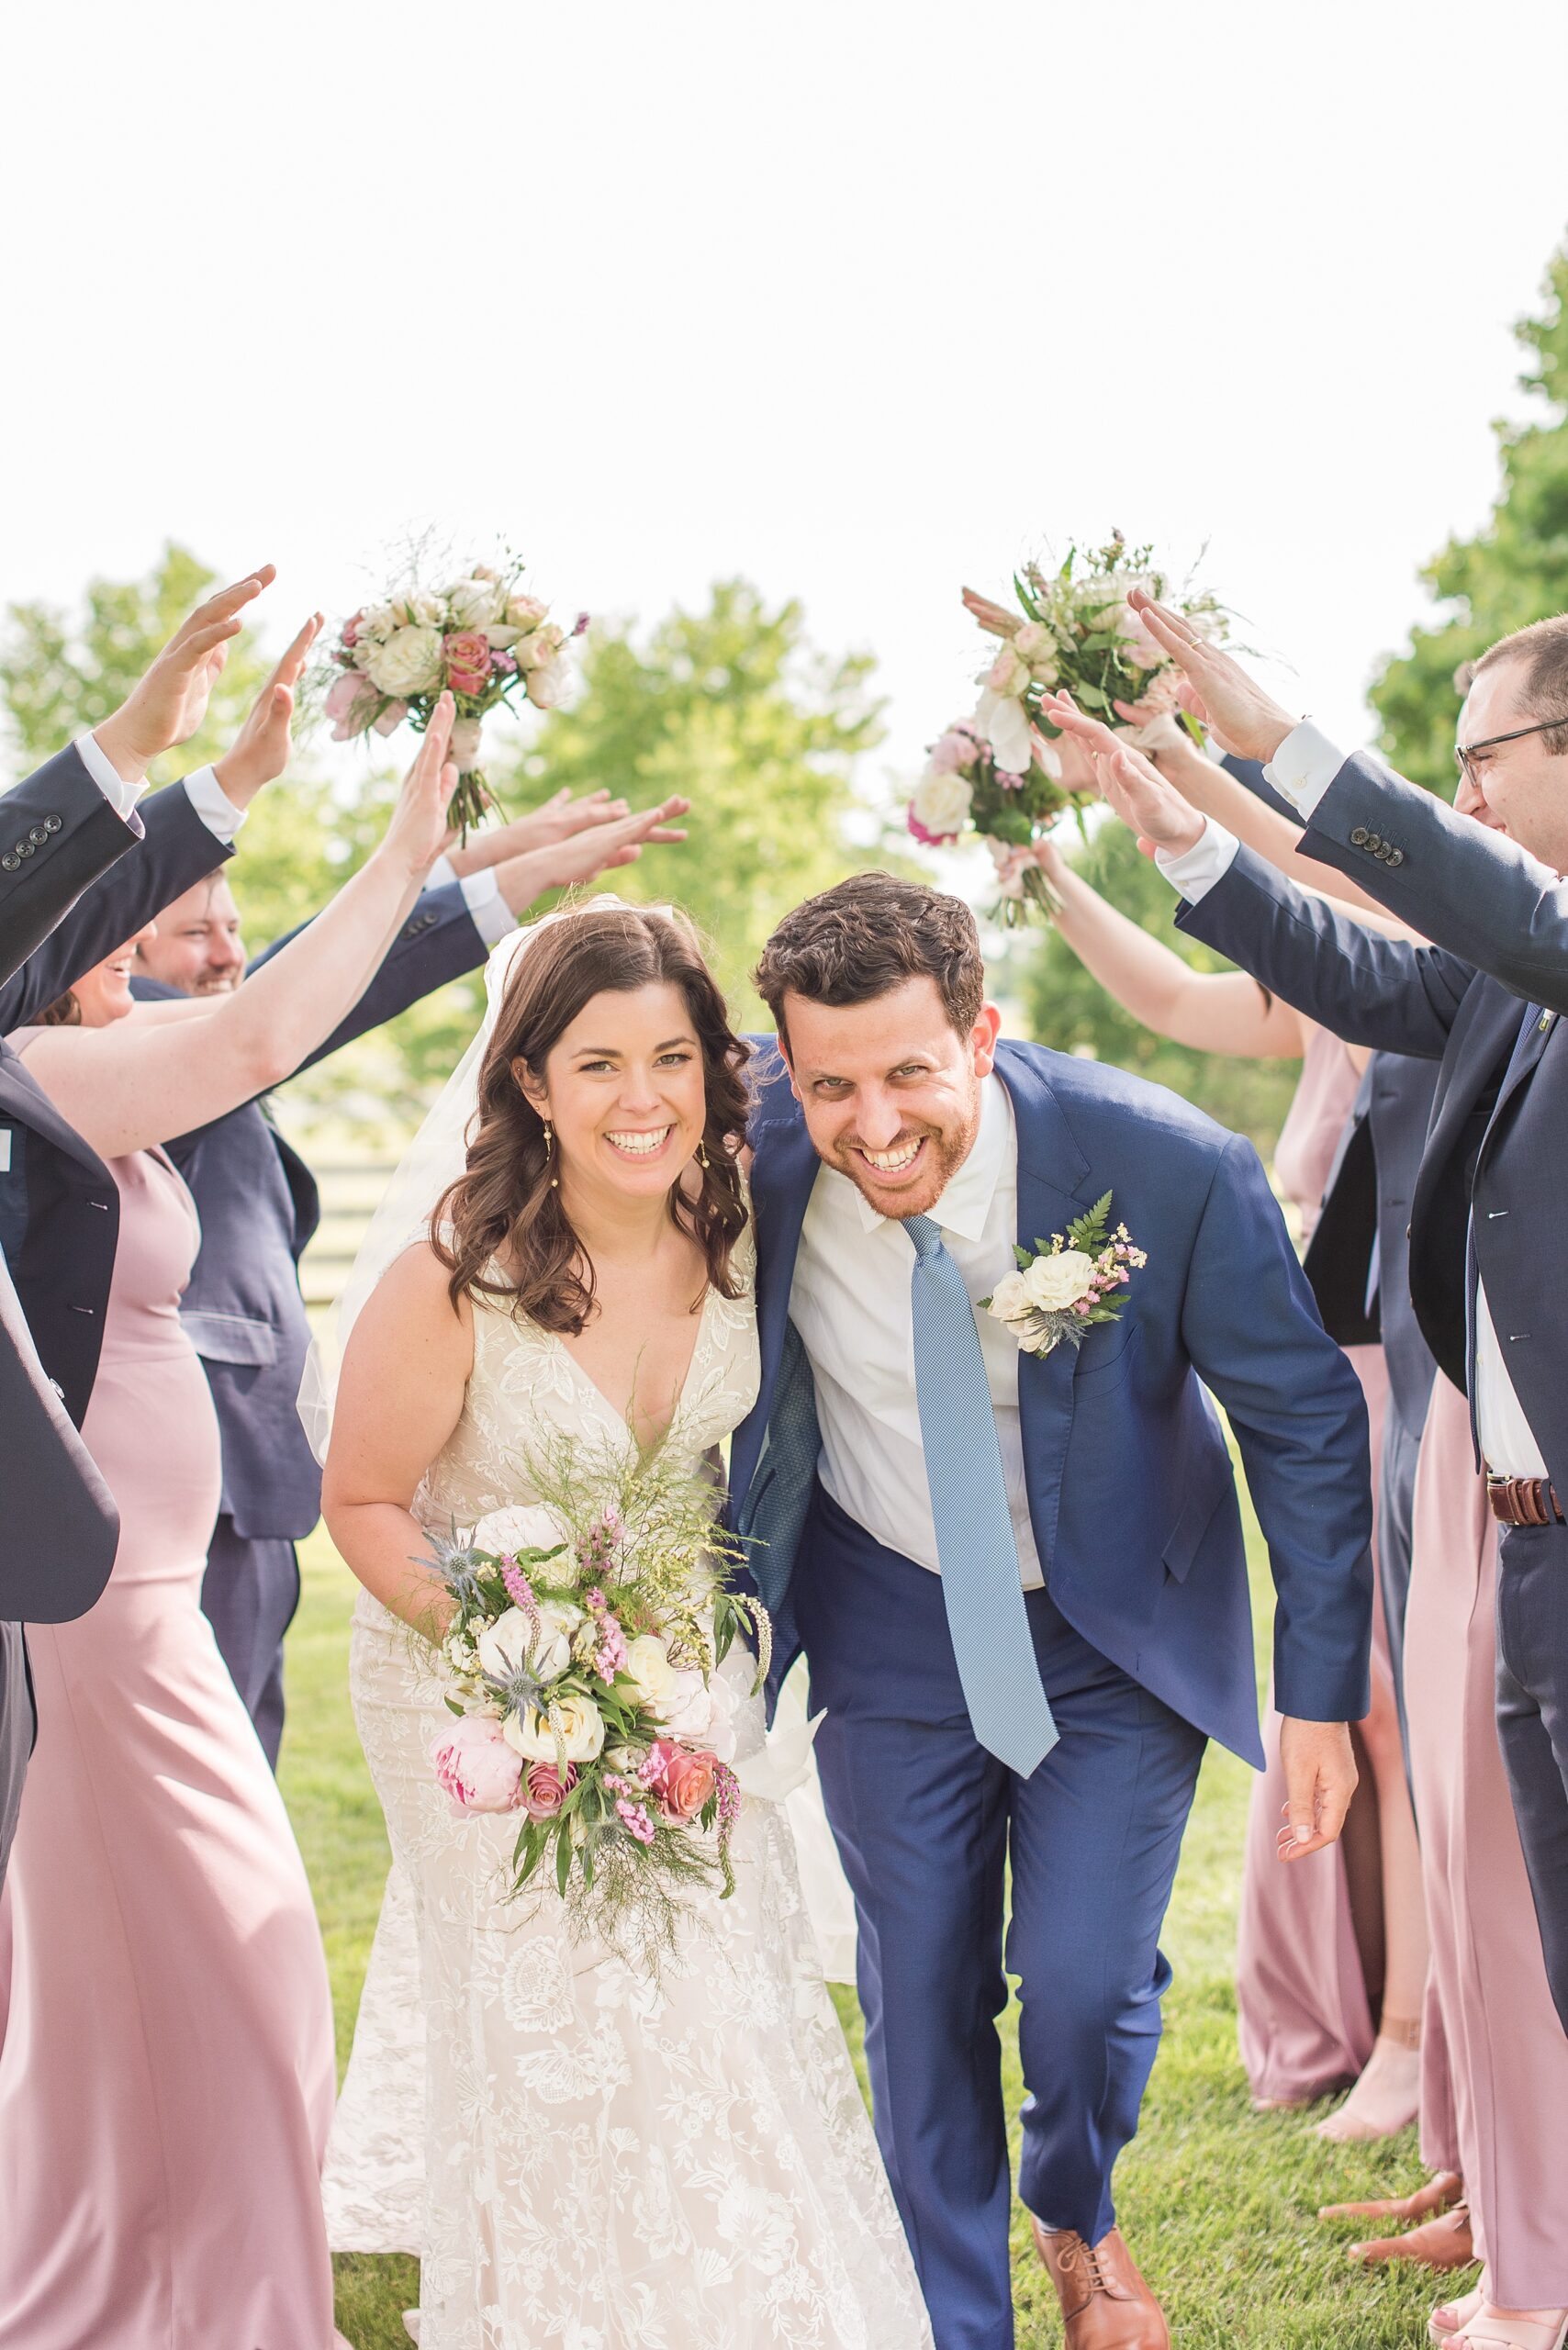 Newlyweds laugh while running under their wedding party's raised hands